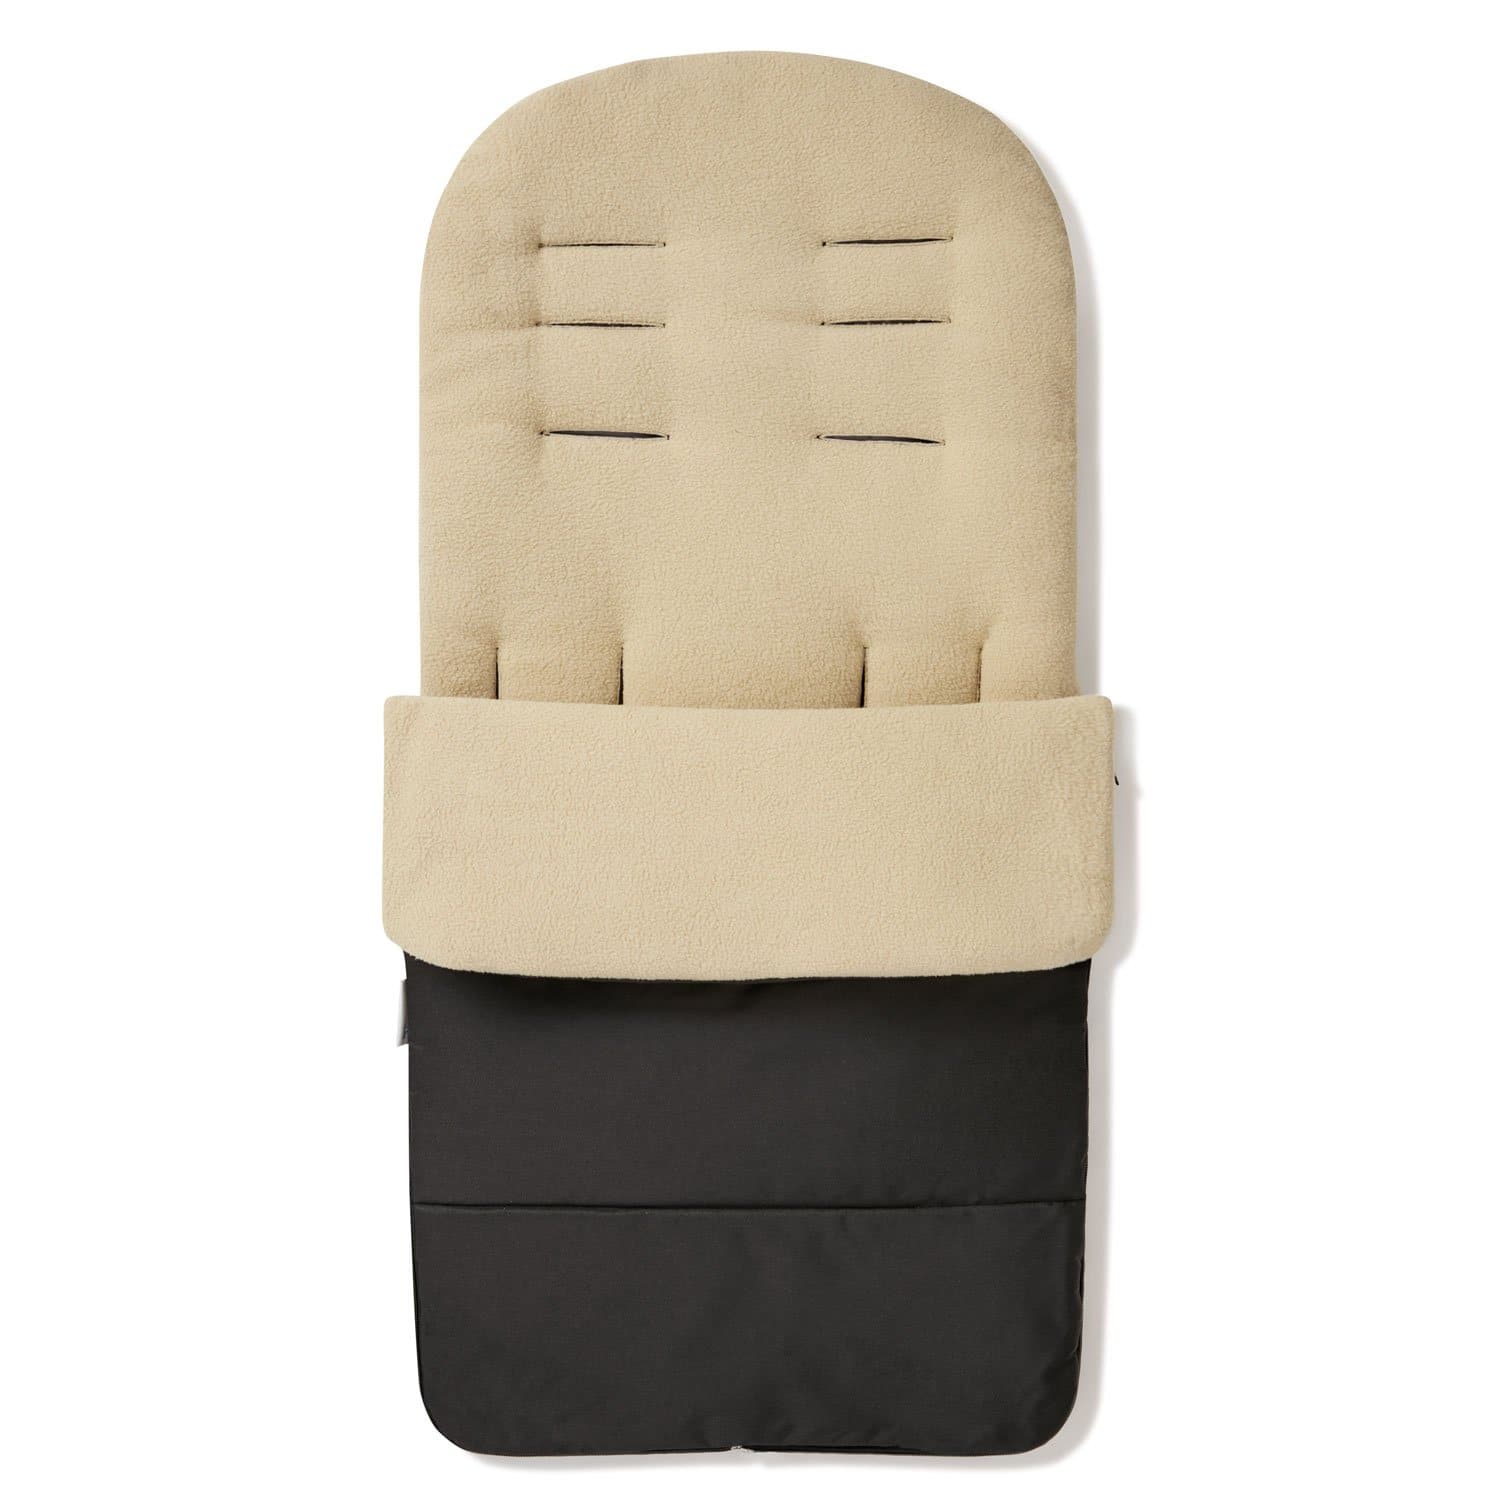 Premium Footmuff / Cosy Toes Compatible with Babybus - Desert Sand / Fits All Models | For Your Little One